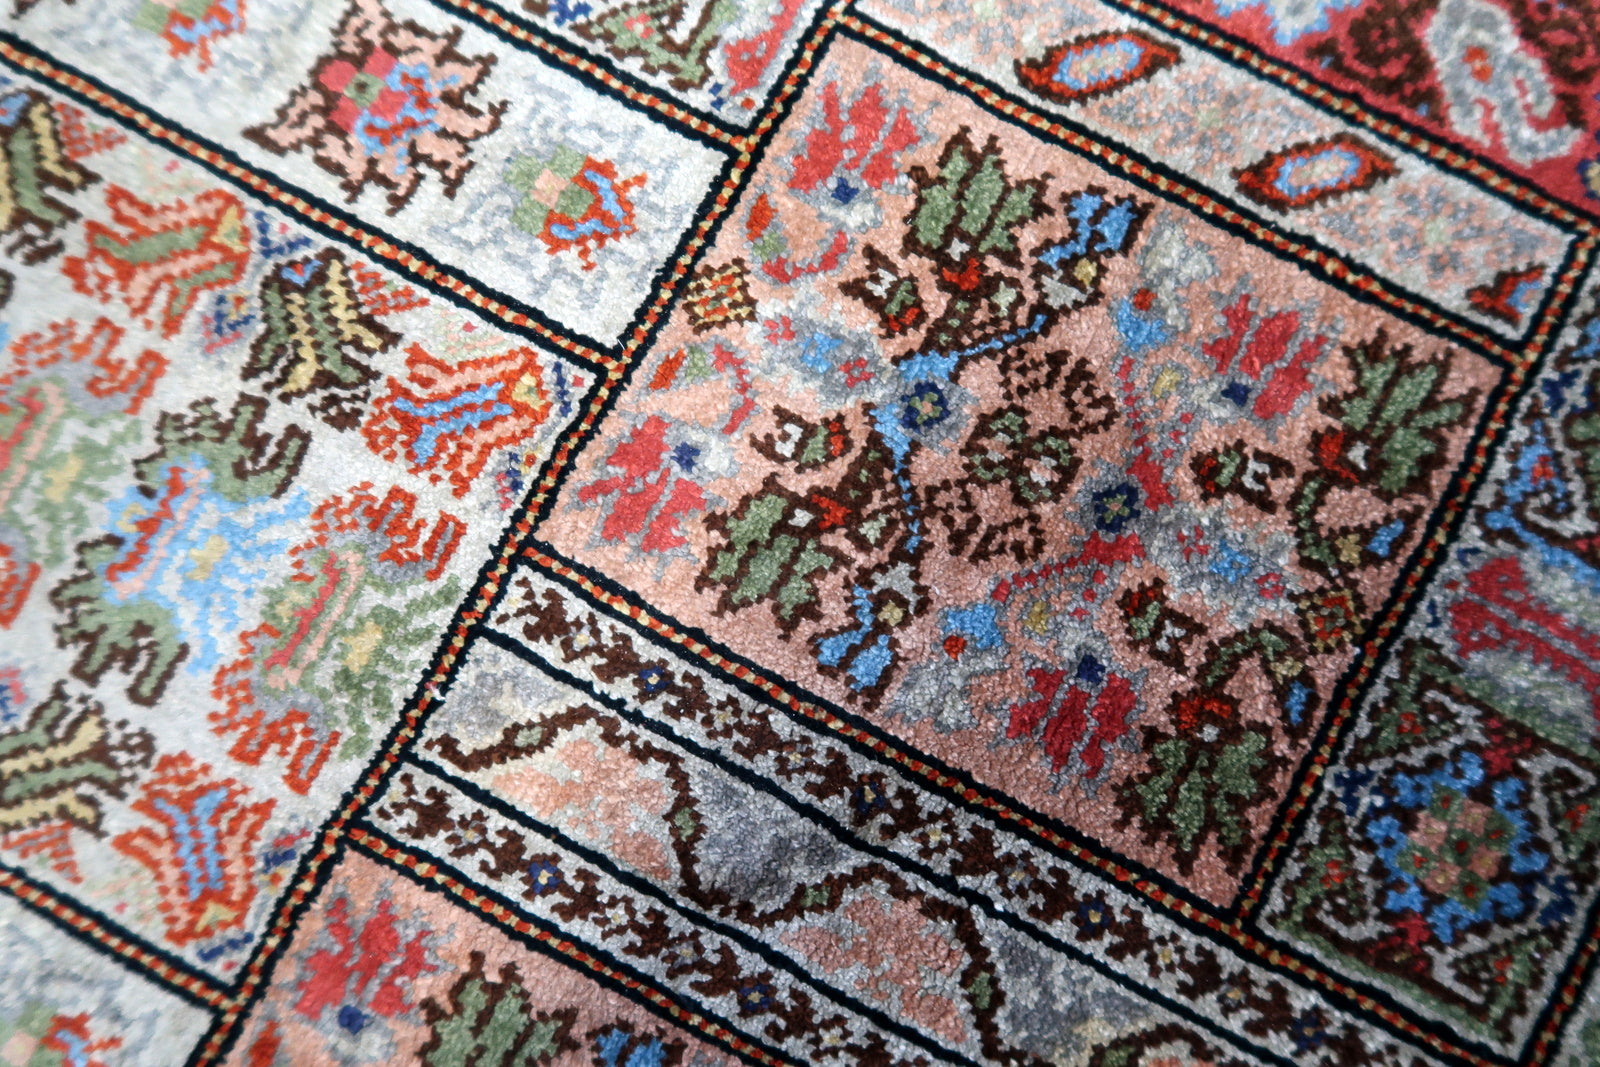 Detailed view of the vintage origins and remarkably good condition of the silk rug